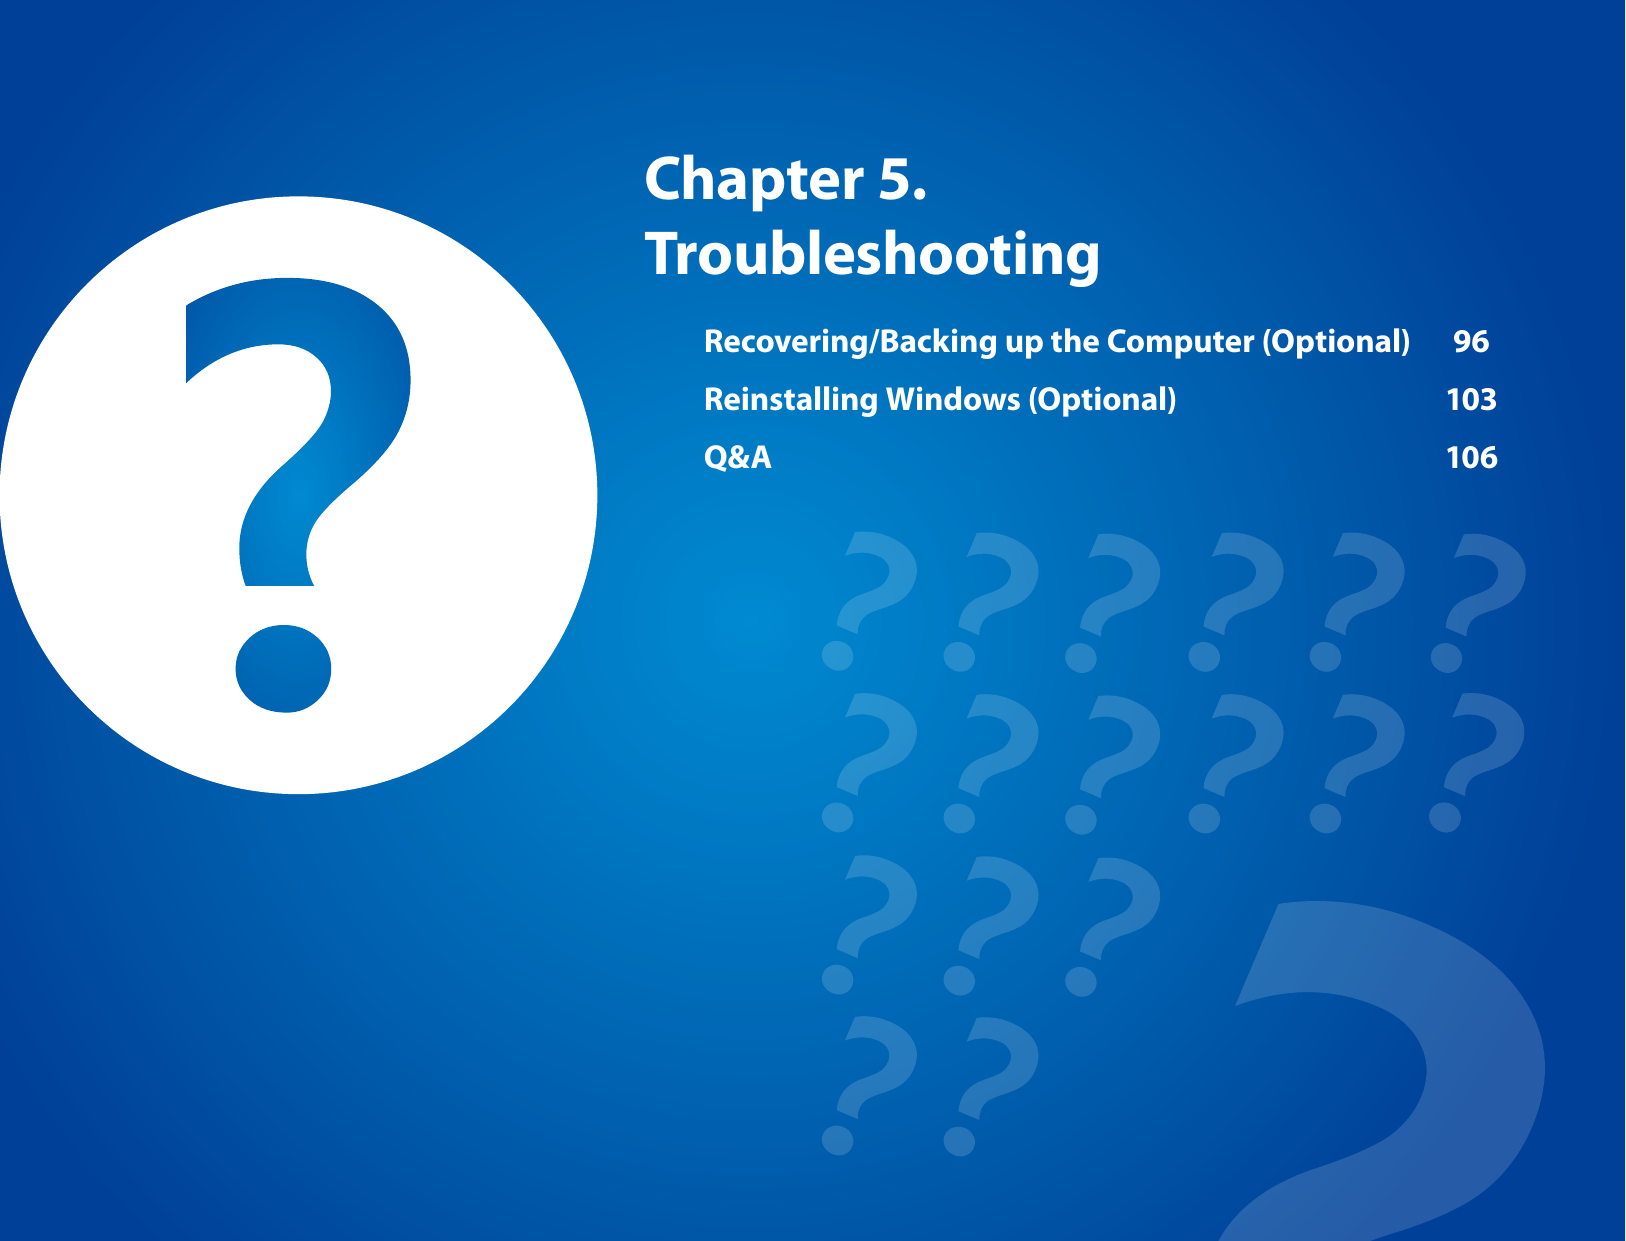 Chapter 5. TroubleshootingRecovering/Backing up the Computer (Optional)  96Reinstalling Windows (Optional)  103Q&amp;A  106